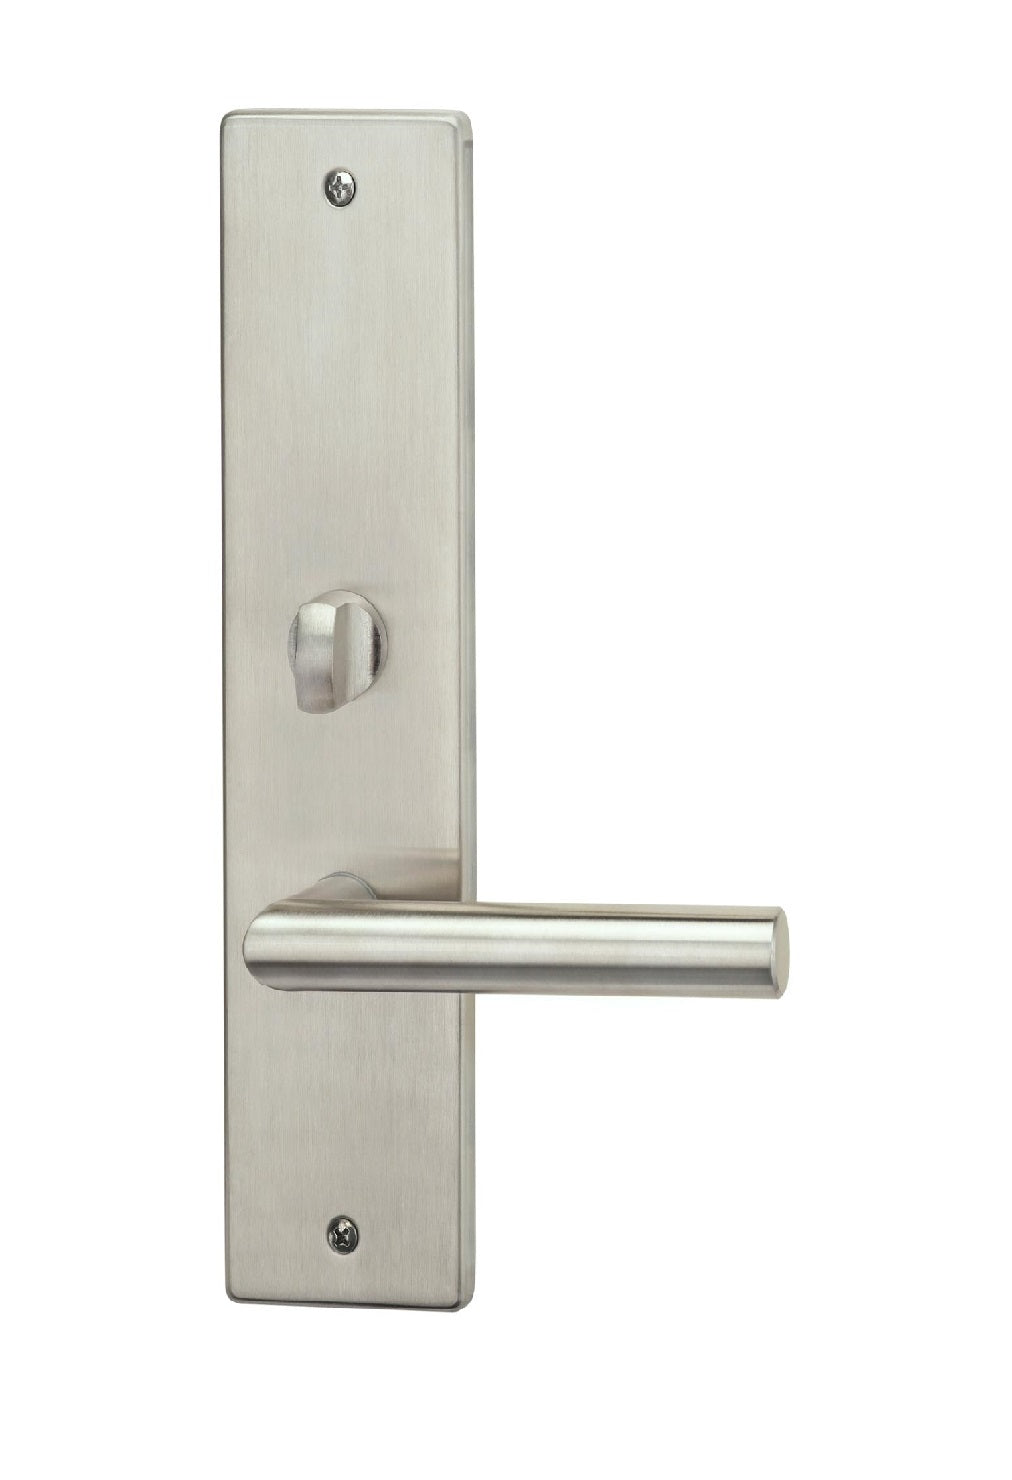 OMNIA 12000 Series Mortise Entry #12 Lever w/Plates